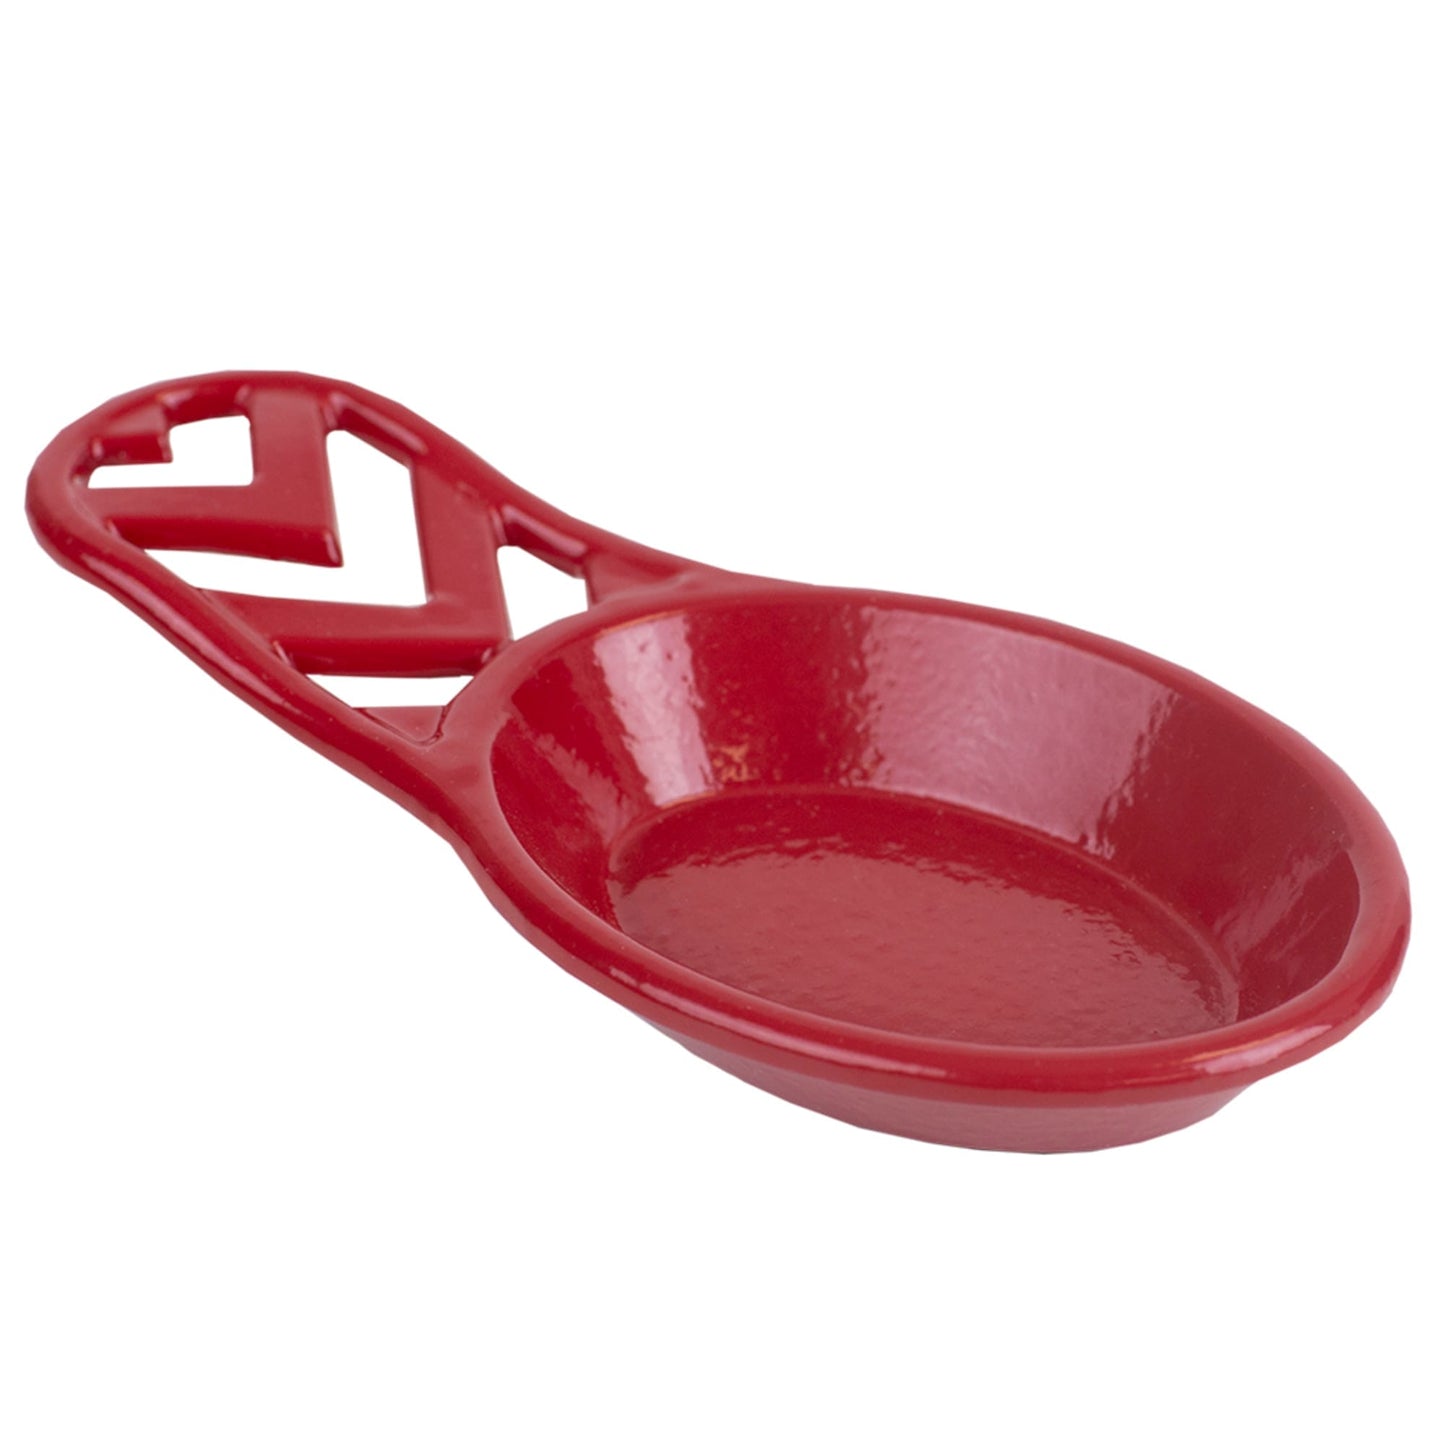 Chevron Collection Cast Iron Spoon Rest, Red